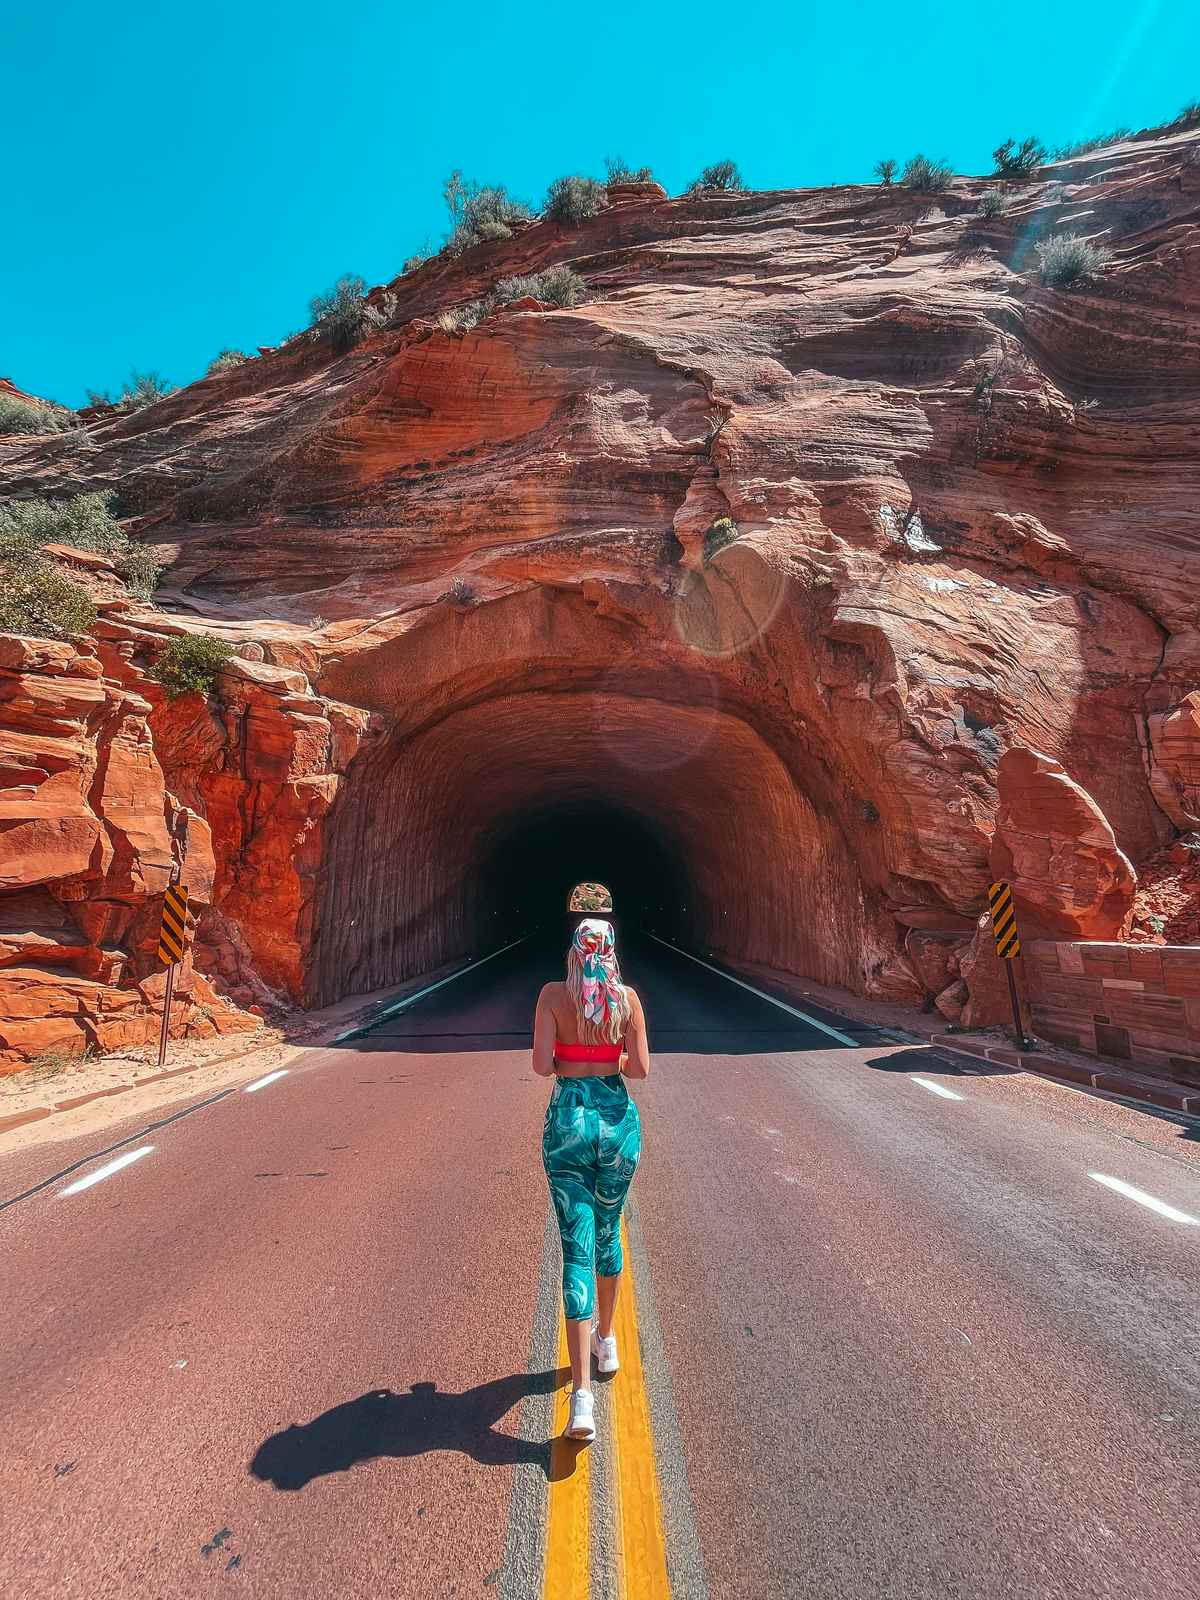 Mt Carmel Tunnel in Zion National Park